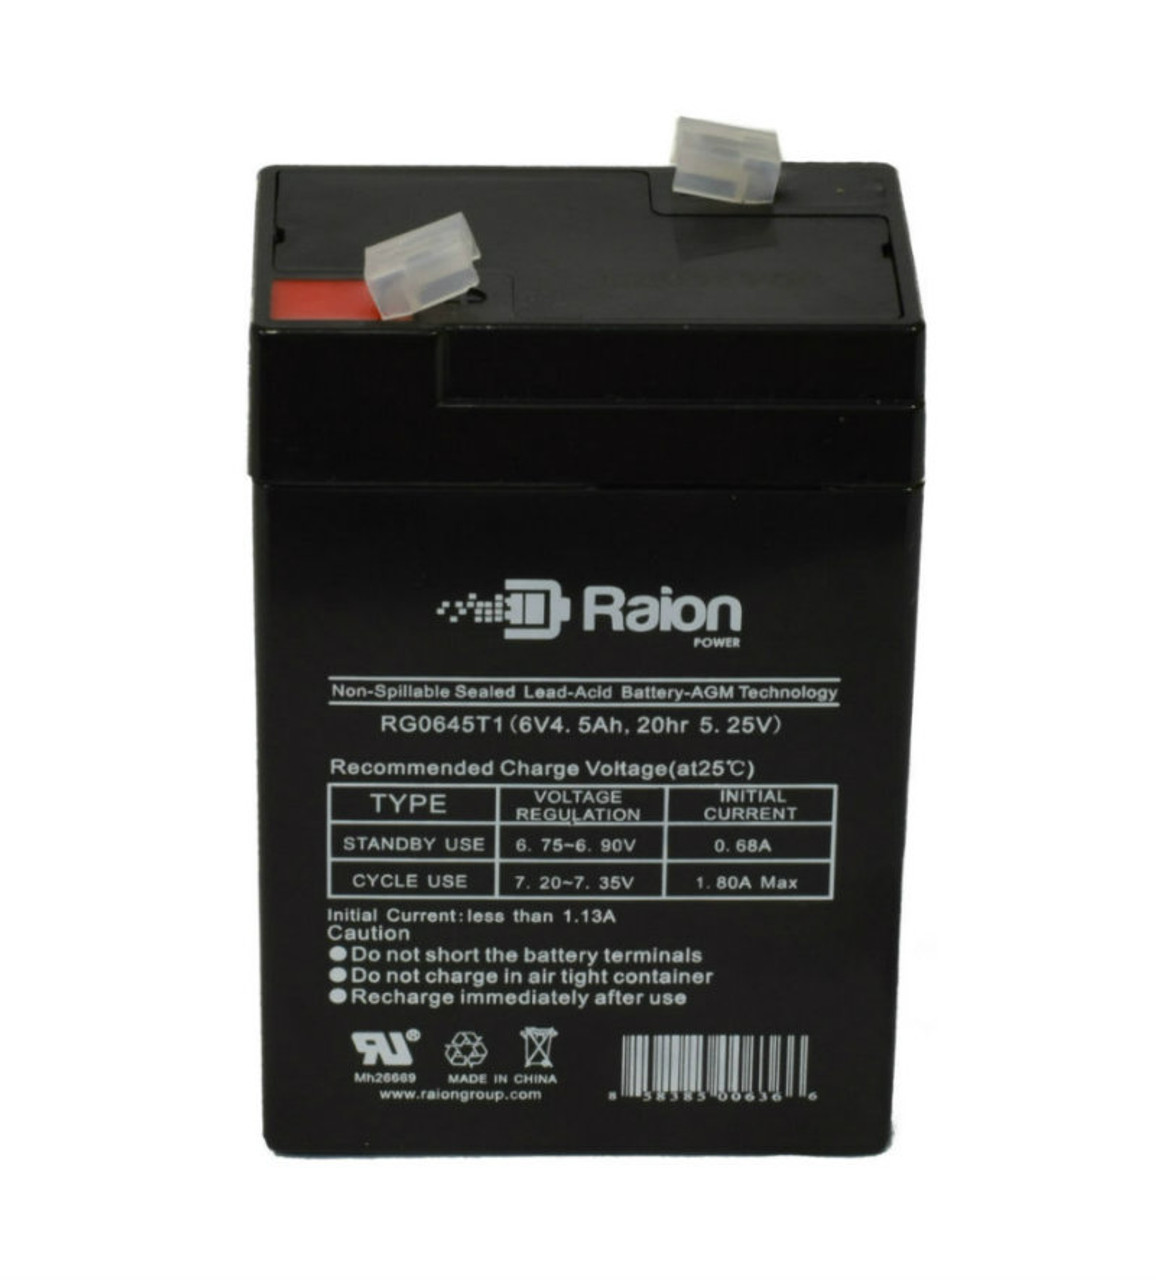 Raion Power RG0645T1 Replacement Battery Cartridge for Champion NP5-6